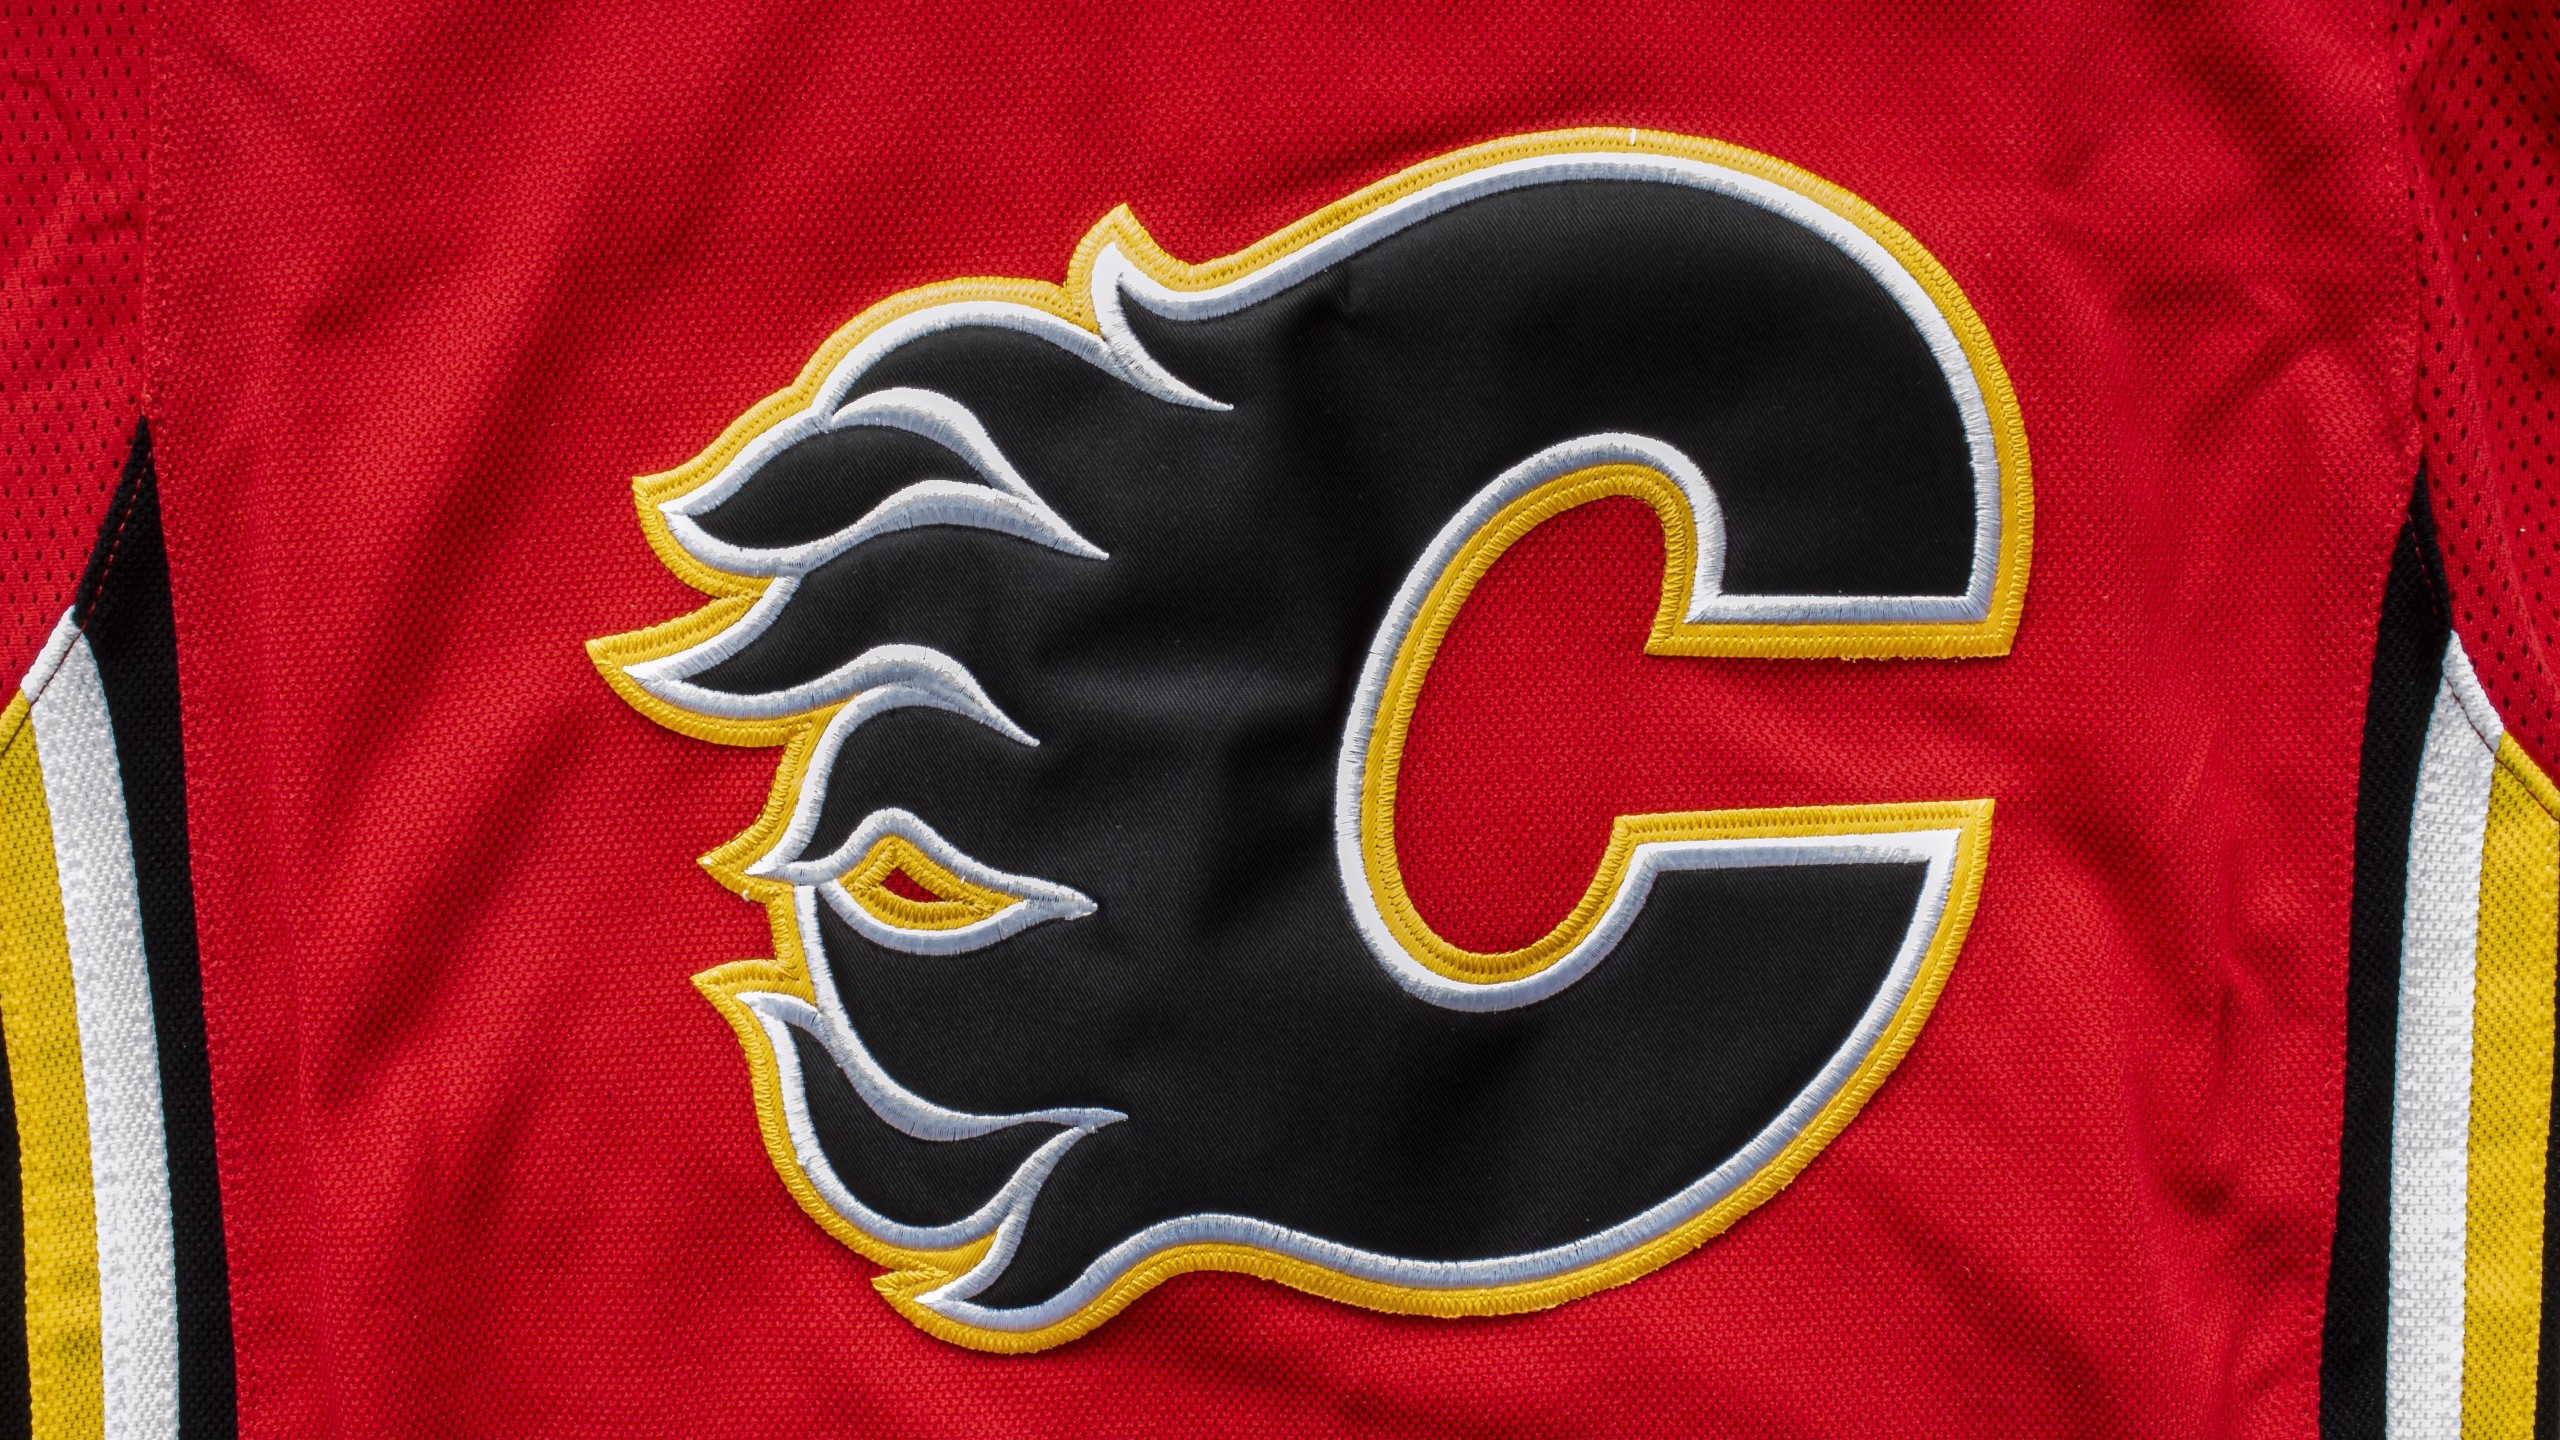 How to Watch Calgary Flames Games Online Without Cable